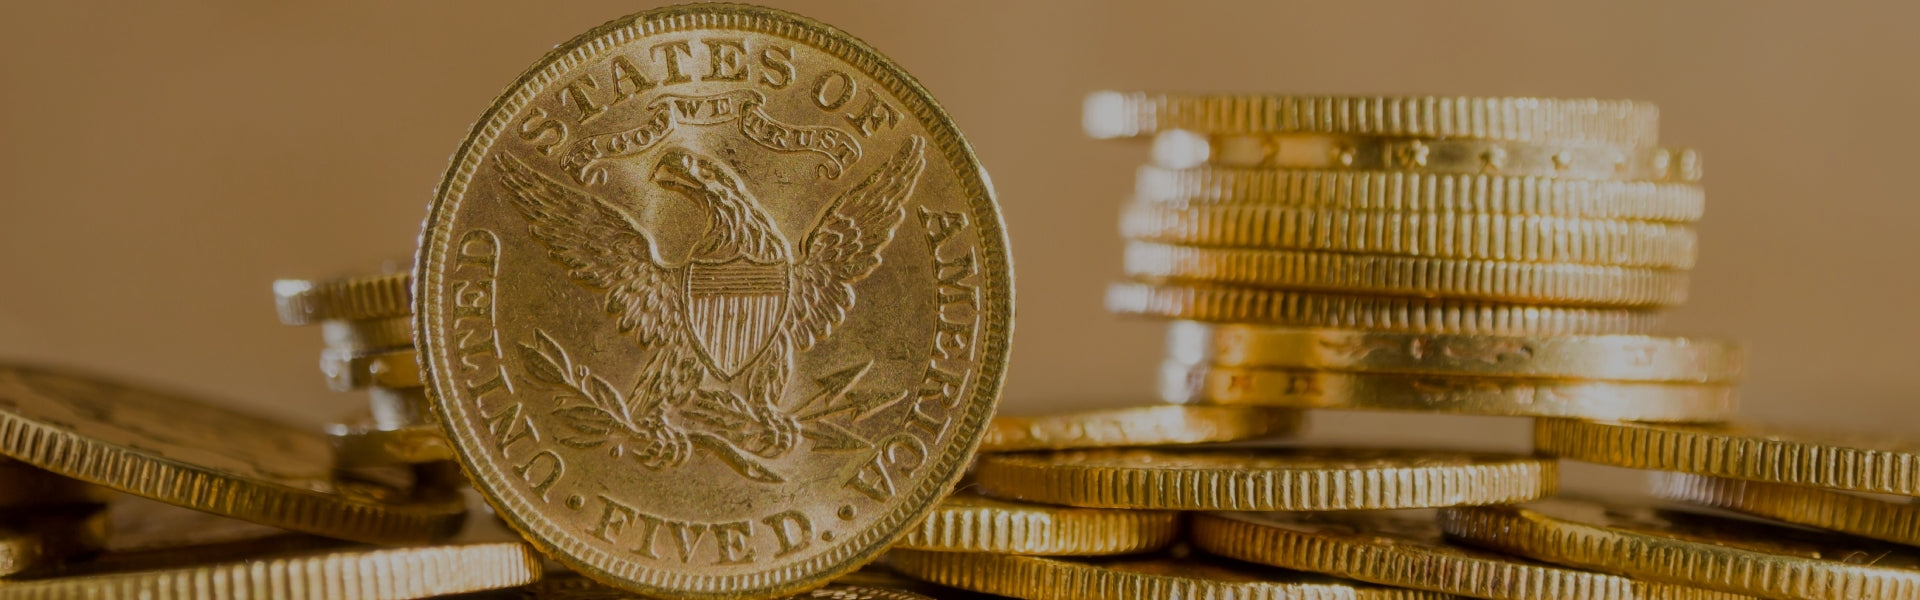 Get cash for your gold coins in Fort Lauderdale